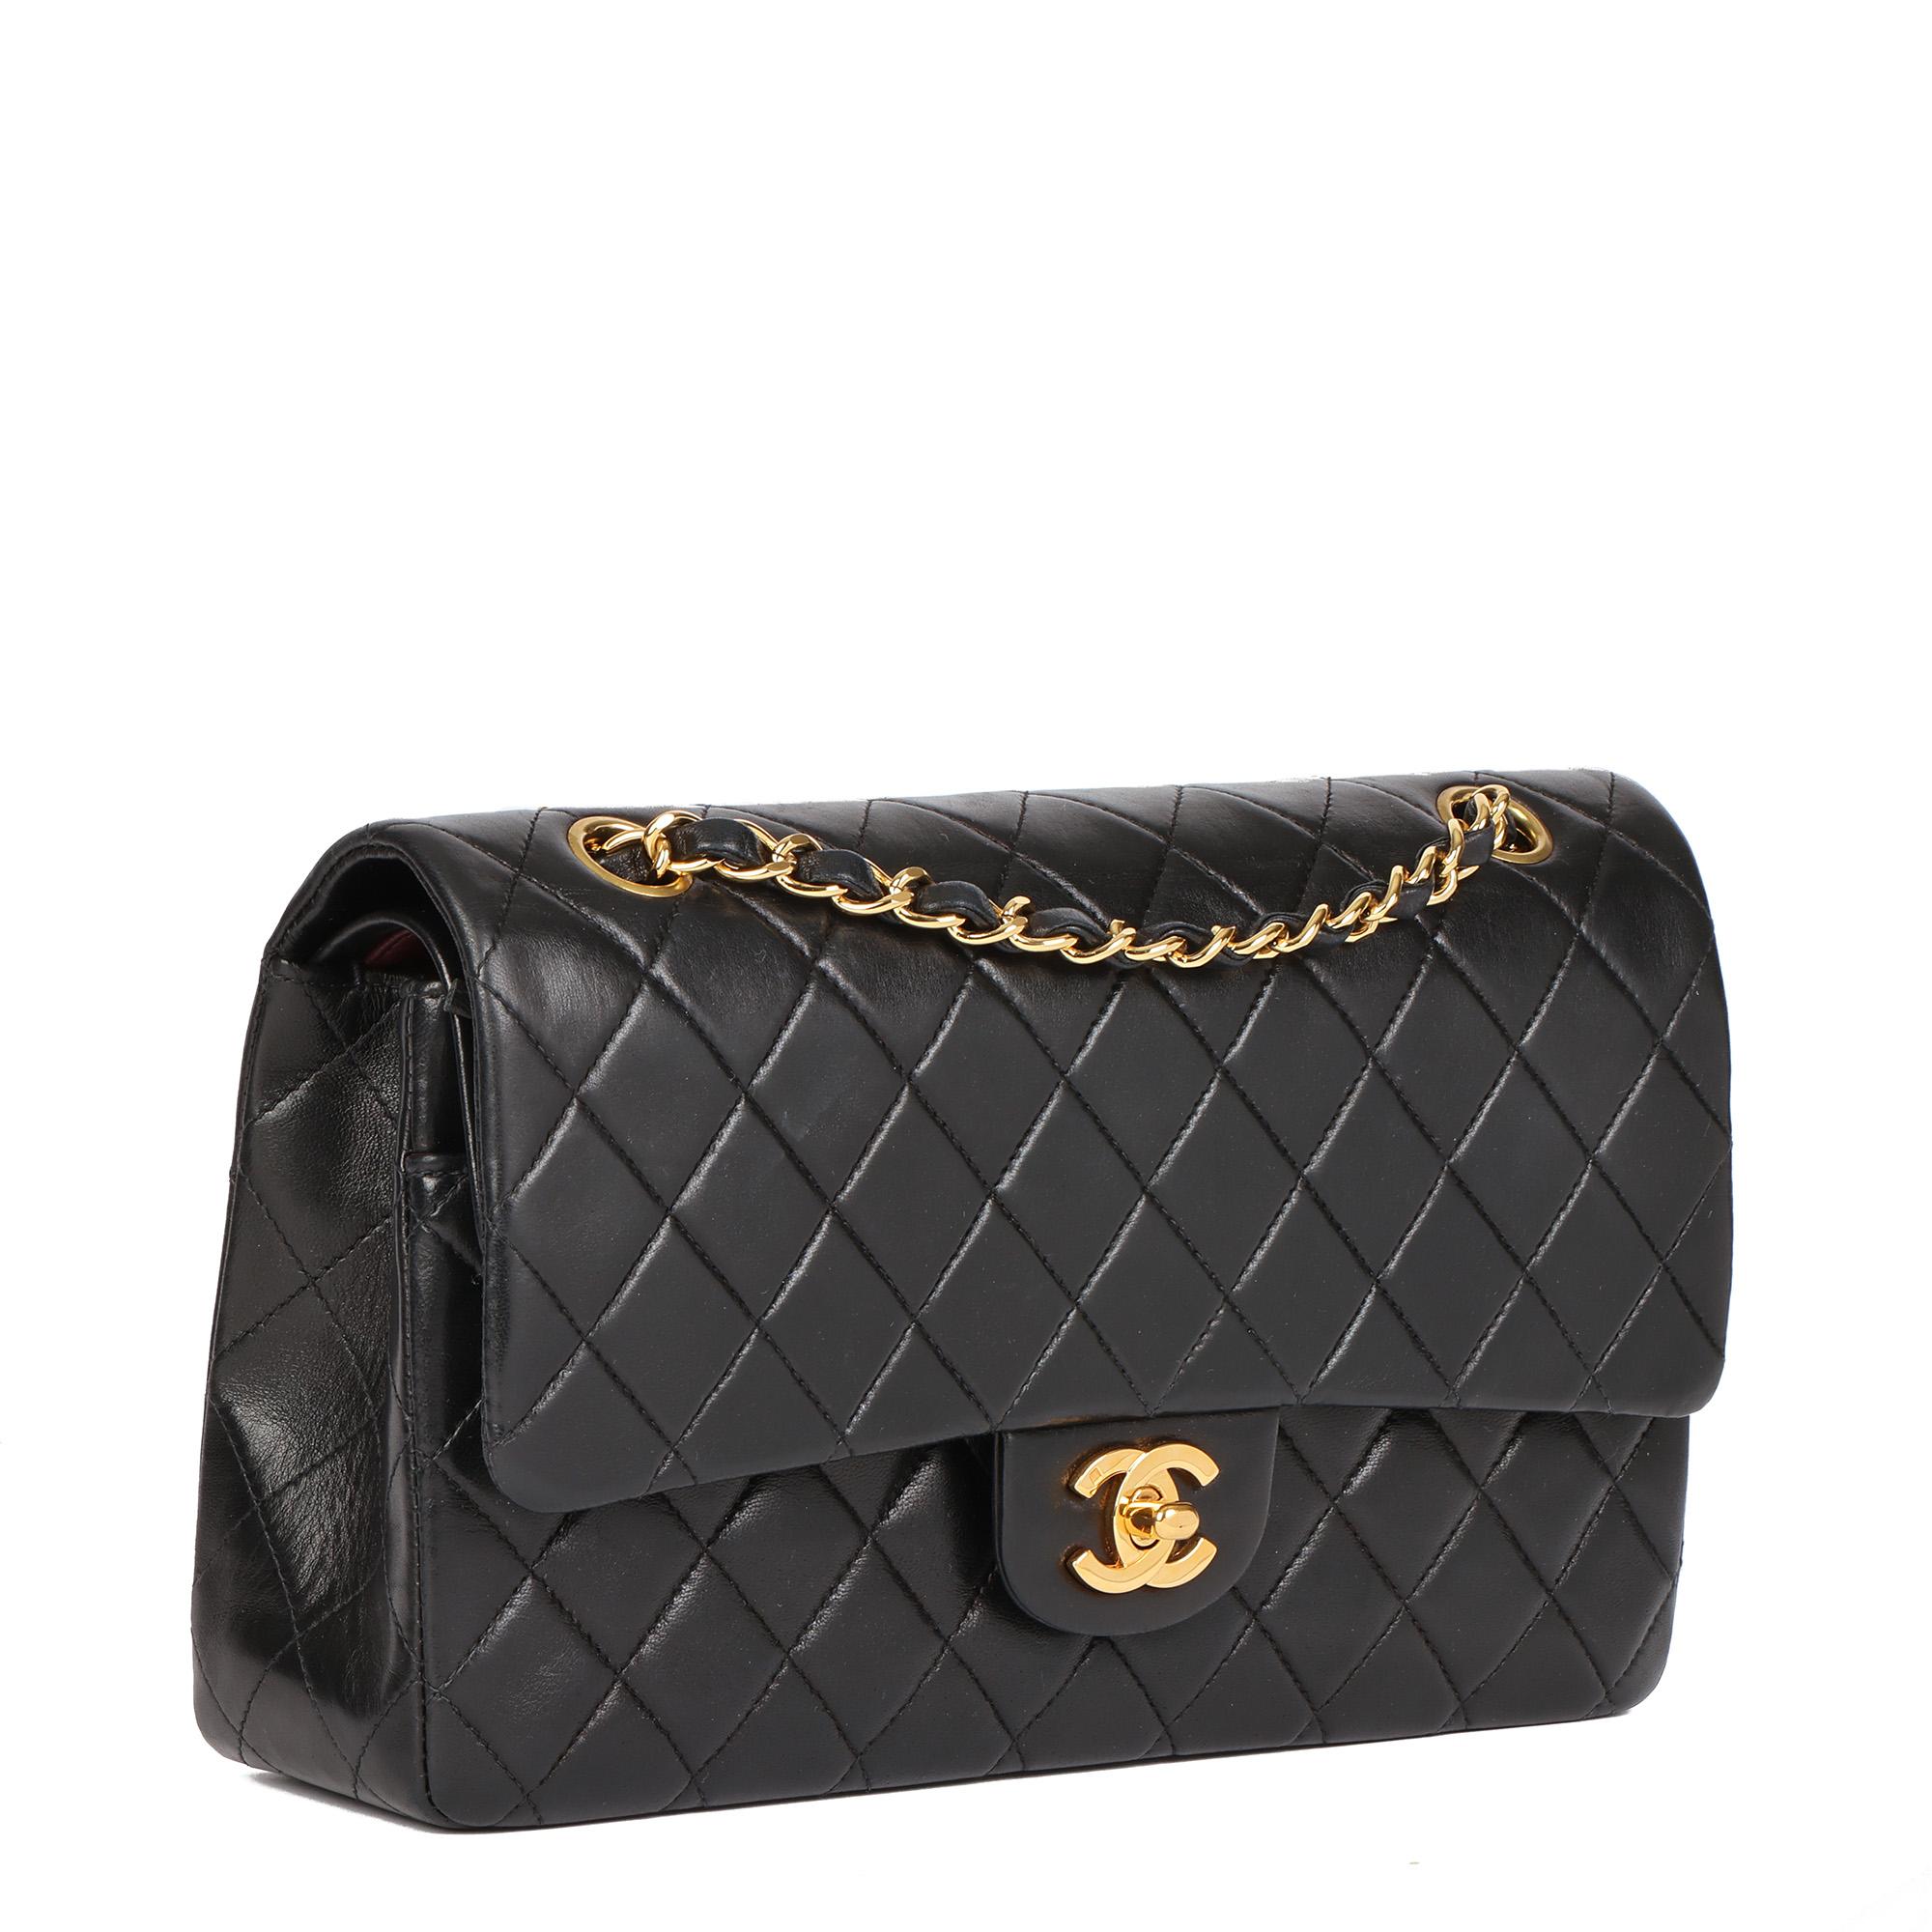 CHANEL
Black Quilted Lambskin Vintage Medium Classic Double Flap Bag

Xupes Reference: HB4577
Serial Number: 5892843
Age (Circa): 1999
Accompanied By: Chanel Dust Bag, Authenticity Card
Authenticity Details: Authenticity Card, Serial Sticker (Made